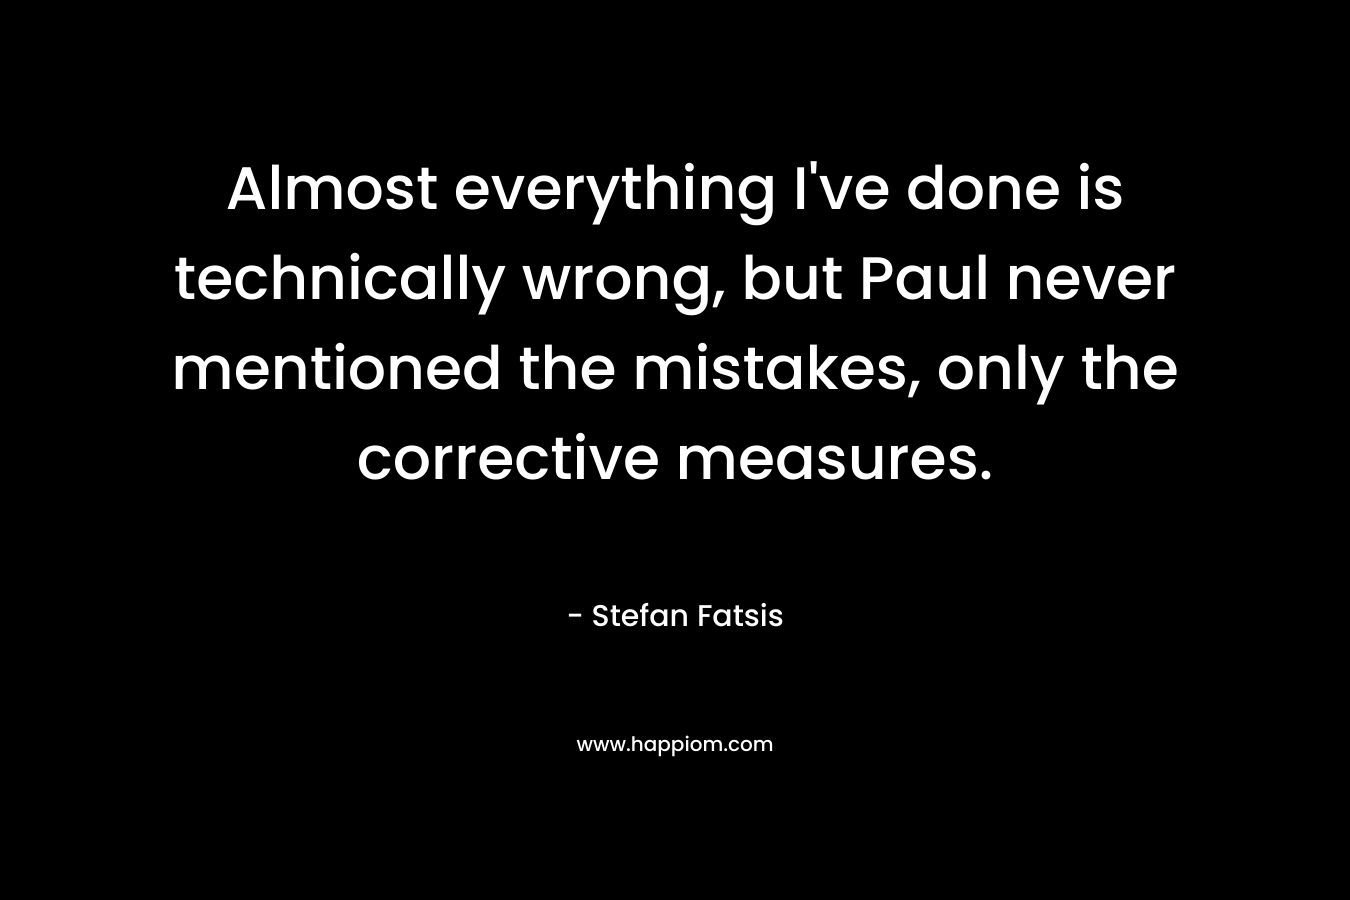 Almost everything I’ve done is technically wrong, but Paul never mentioned the mistakes, only the corrective measures. – Stefan Fatsis